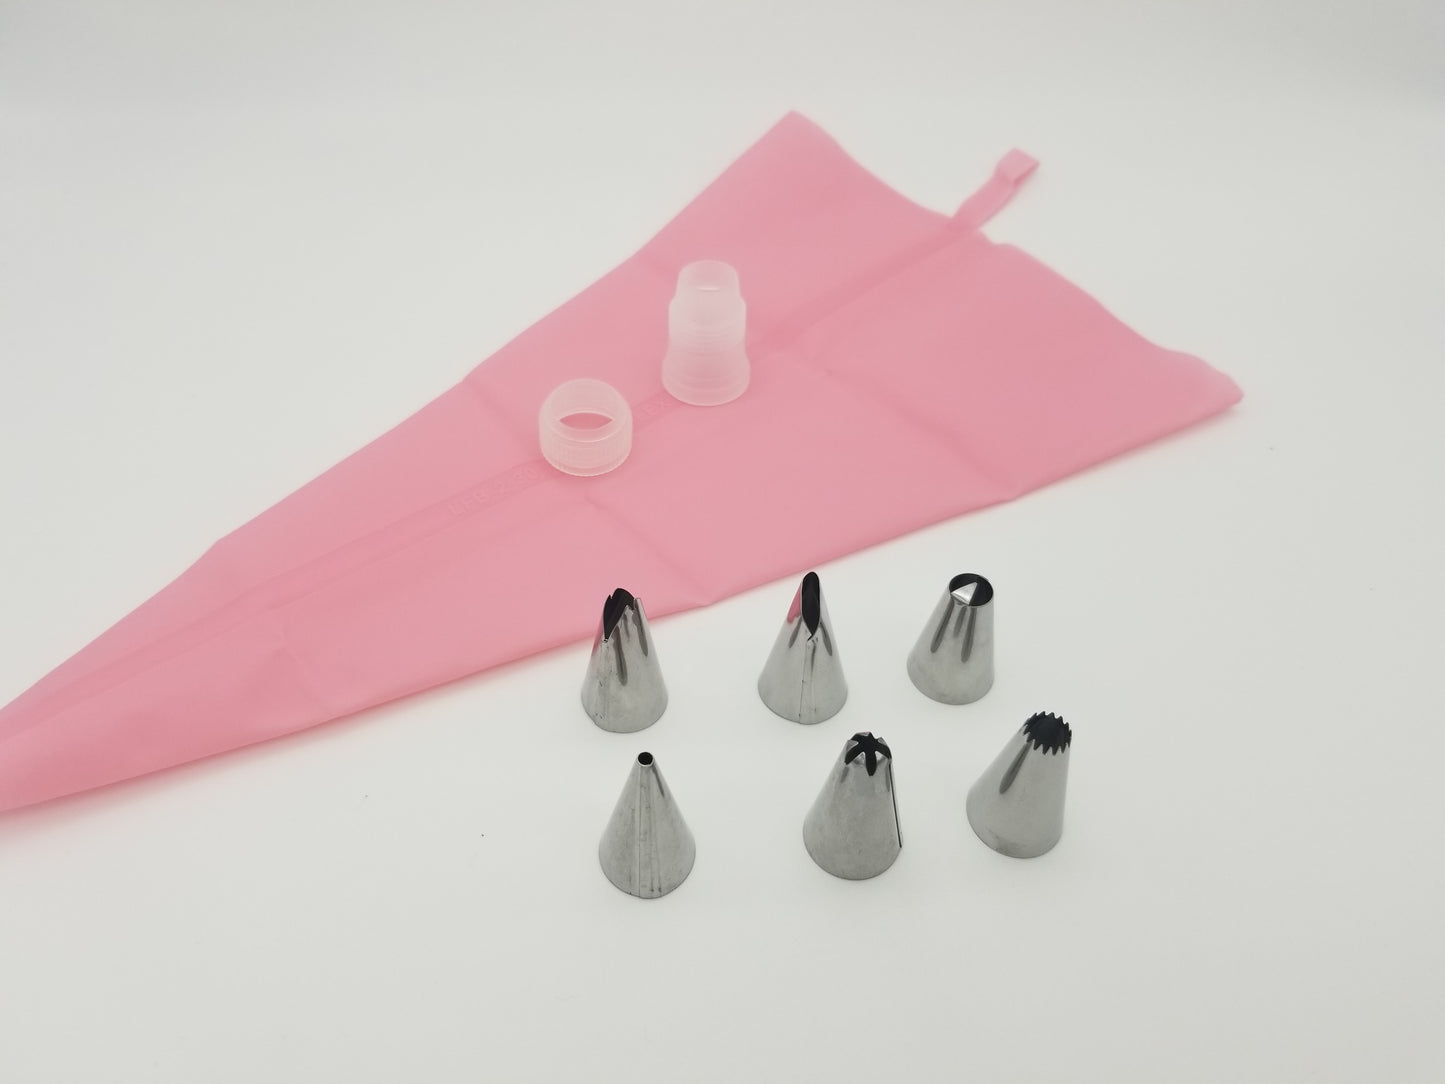 Silicone Piping Bag - 8 Piece Set